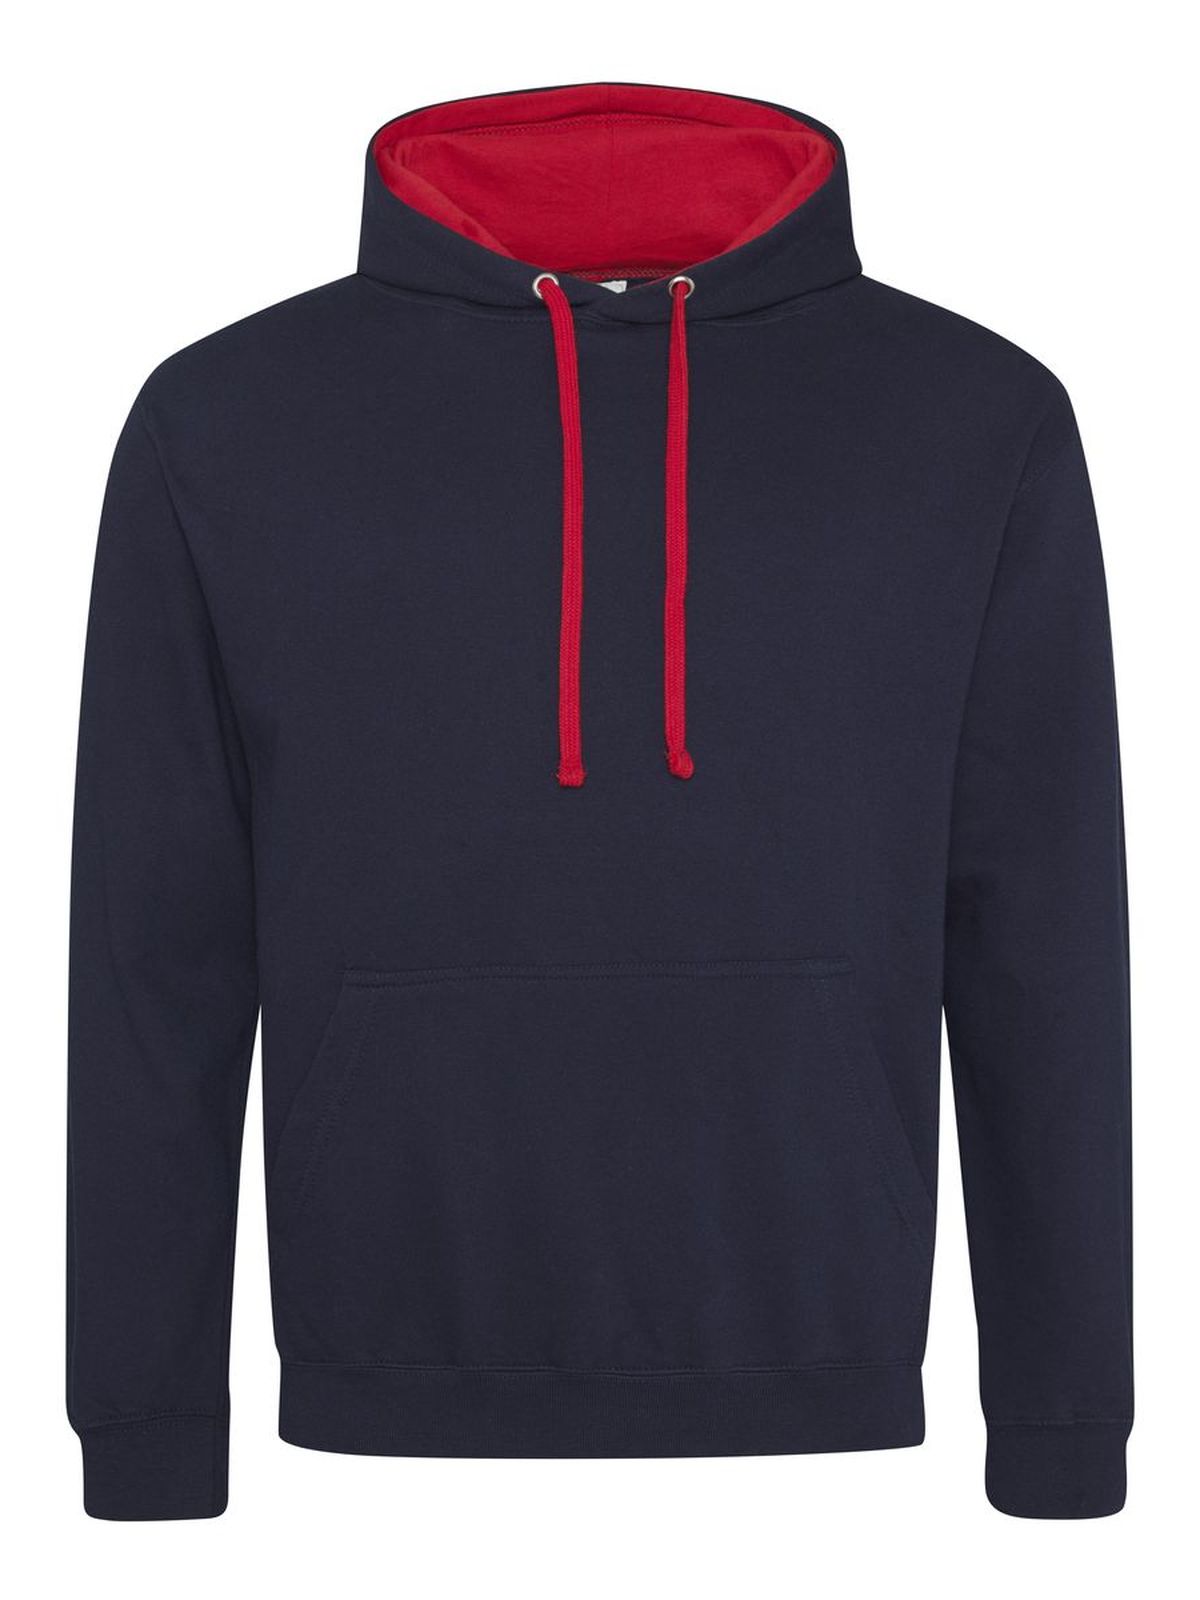 varsity-hoodie-new-french-navy-fire-red.webp